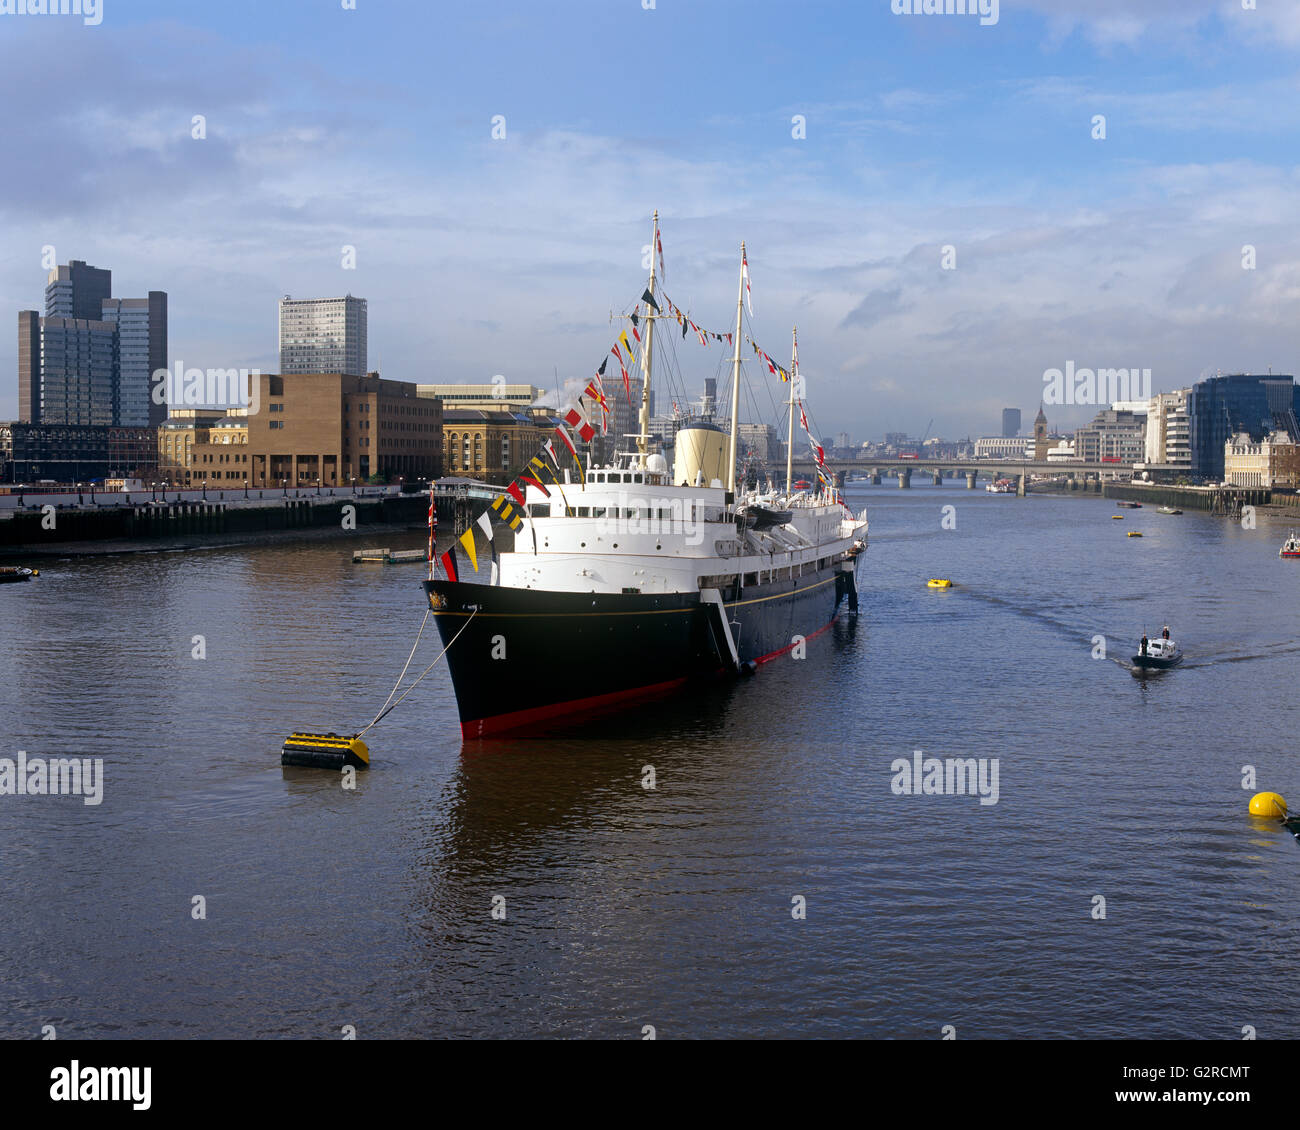 British ship on the River Thames Stock Photo